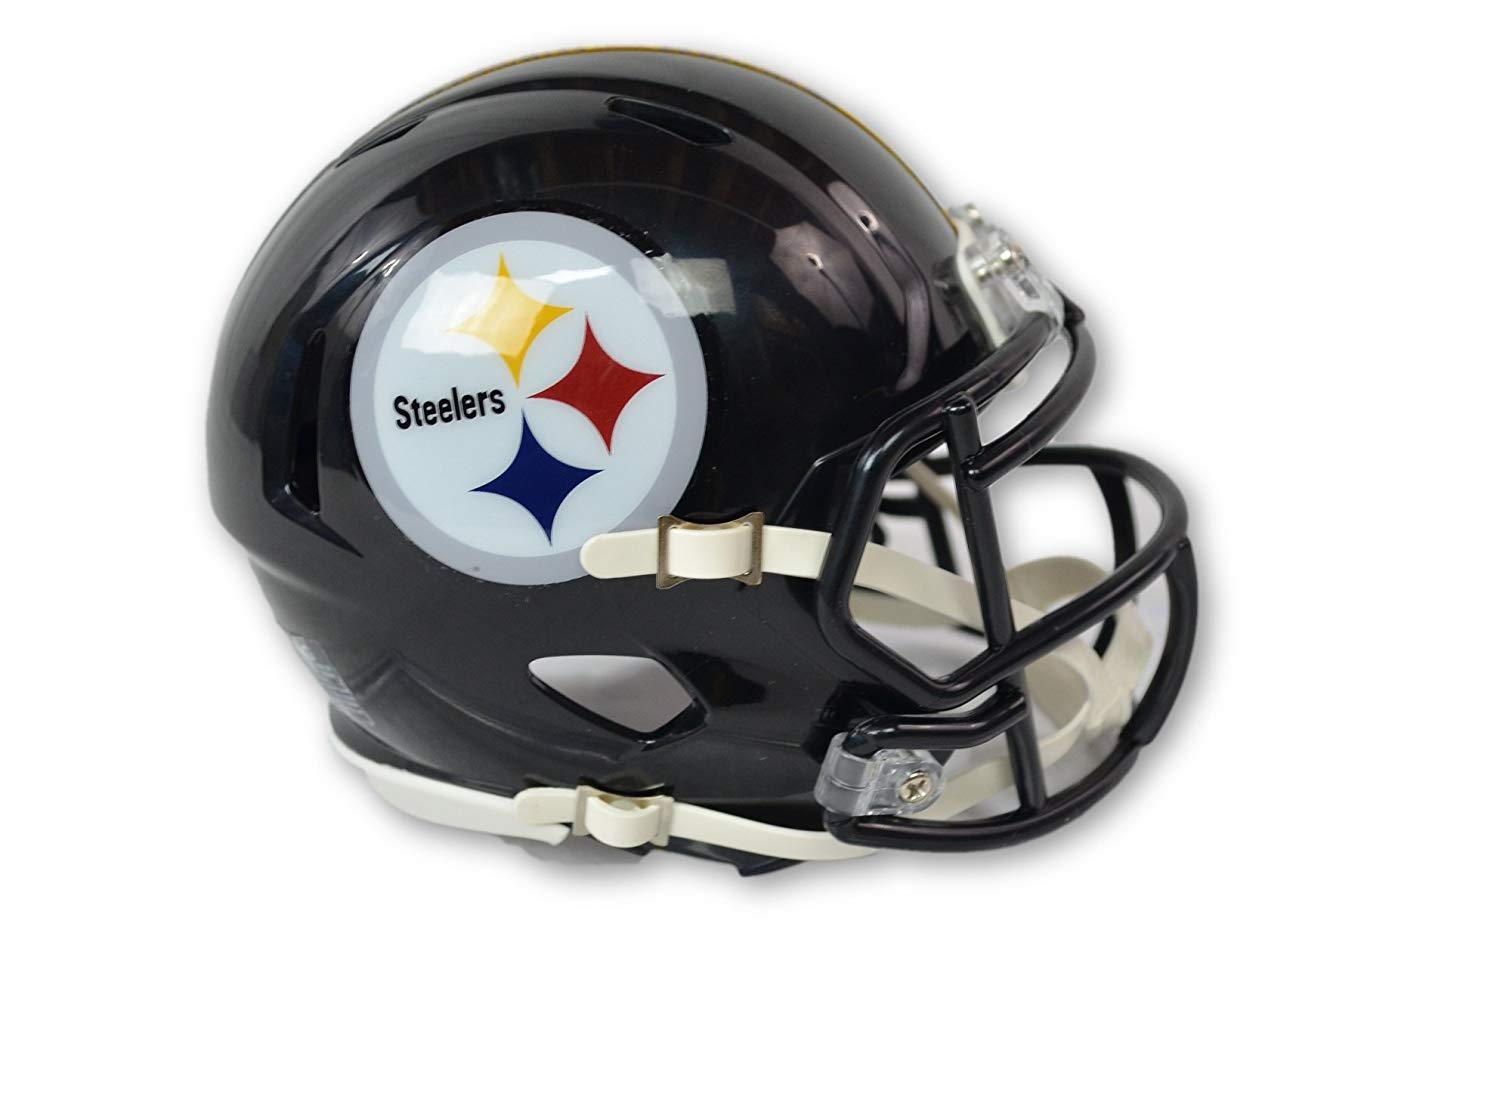 Official National Football League Fan Shop Authentic NFL Mini Speed Helmet and Display Case Bundle. Great Sports Fan Collectible - Office, Home or Man Cave